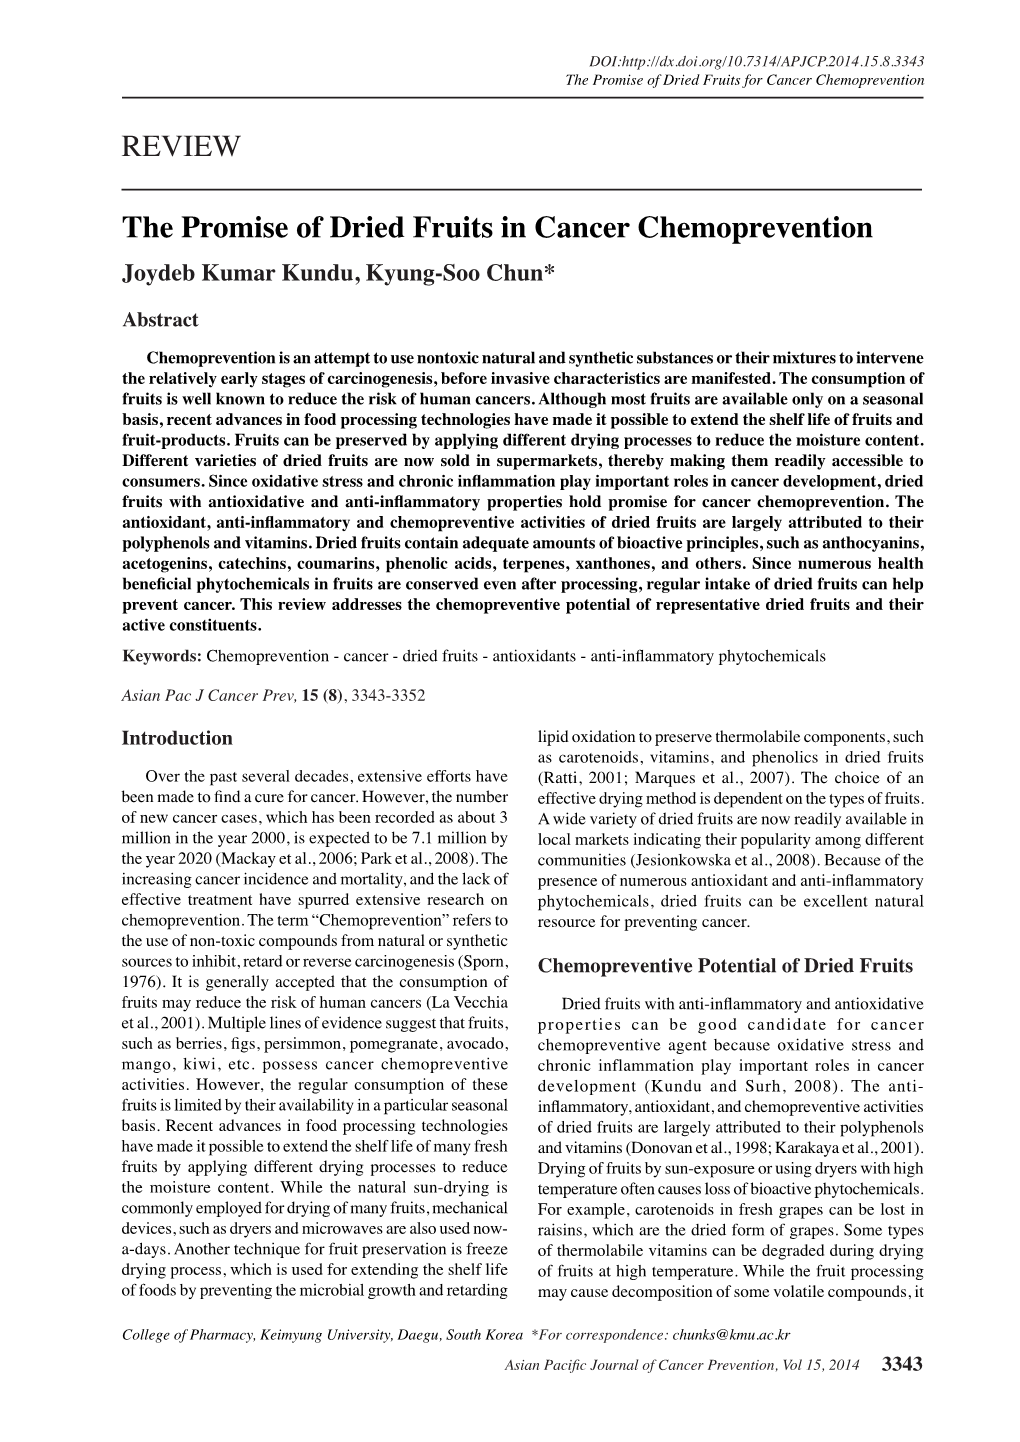 REVIEW the Promise of Dried Fruits in Cancer Chemoprevention